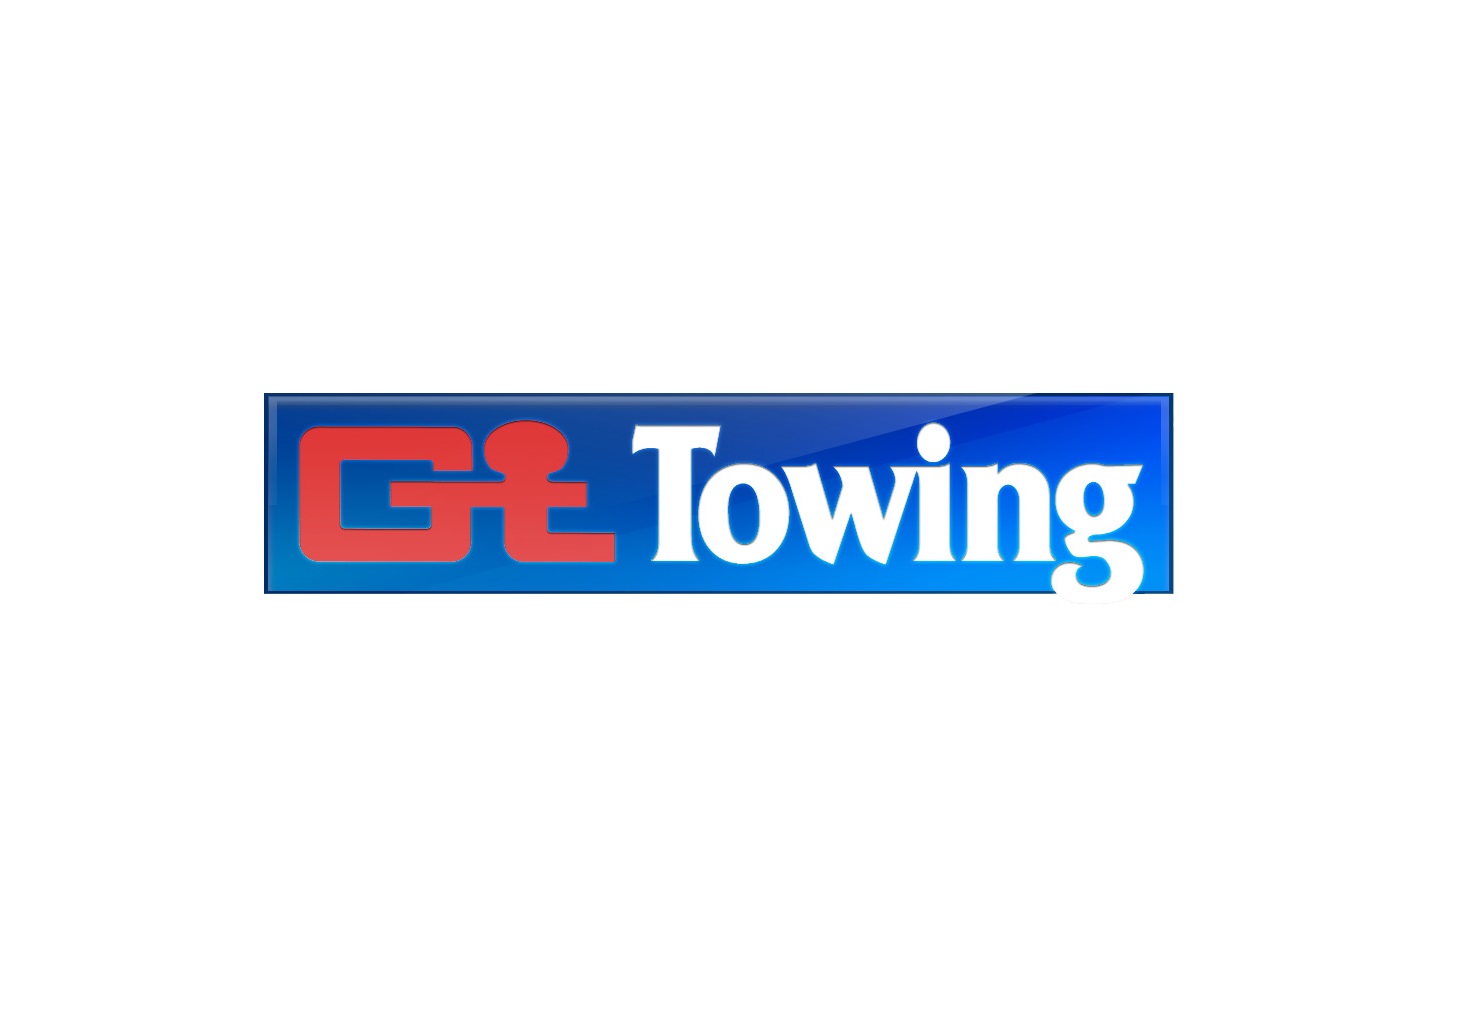 GT Towing Ltd is founded.